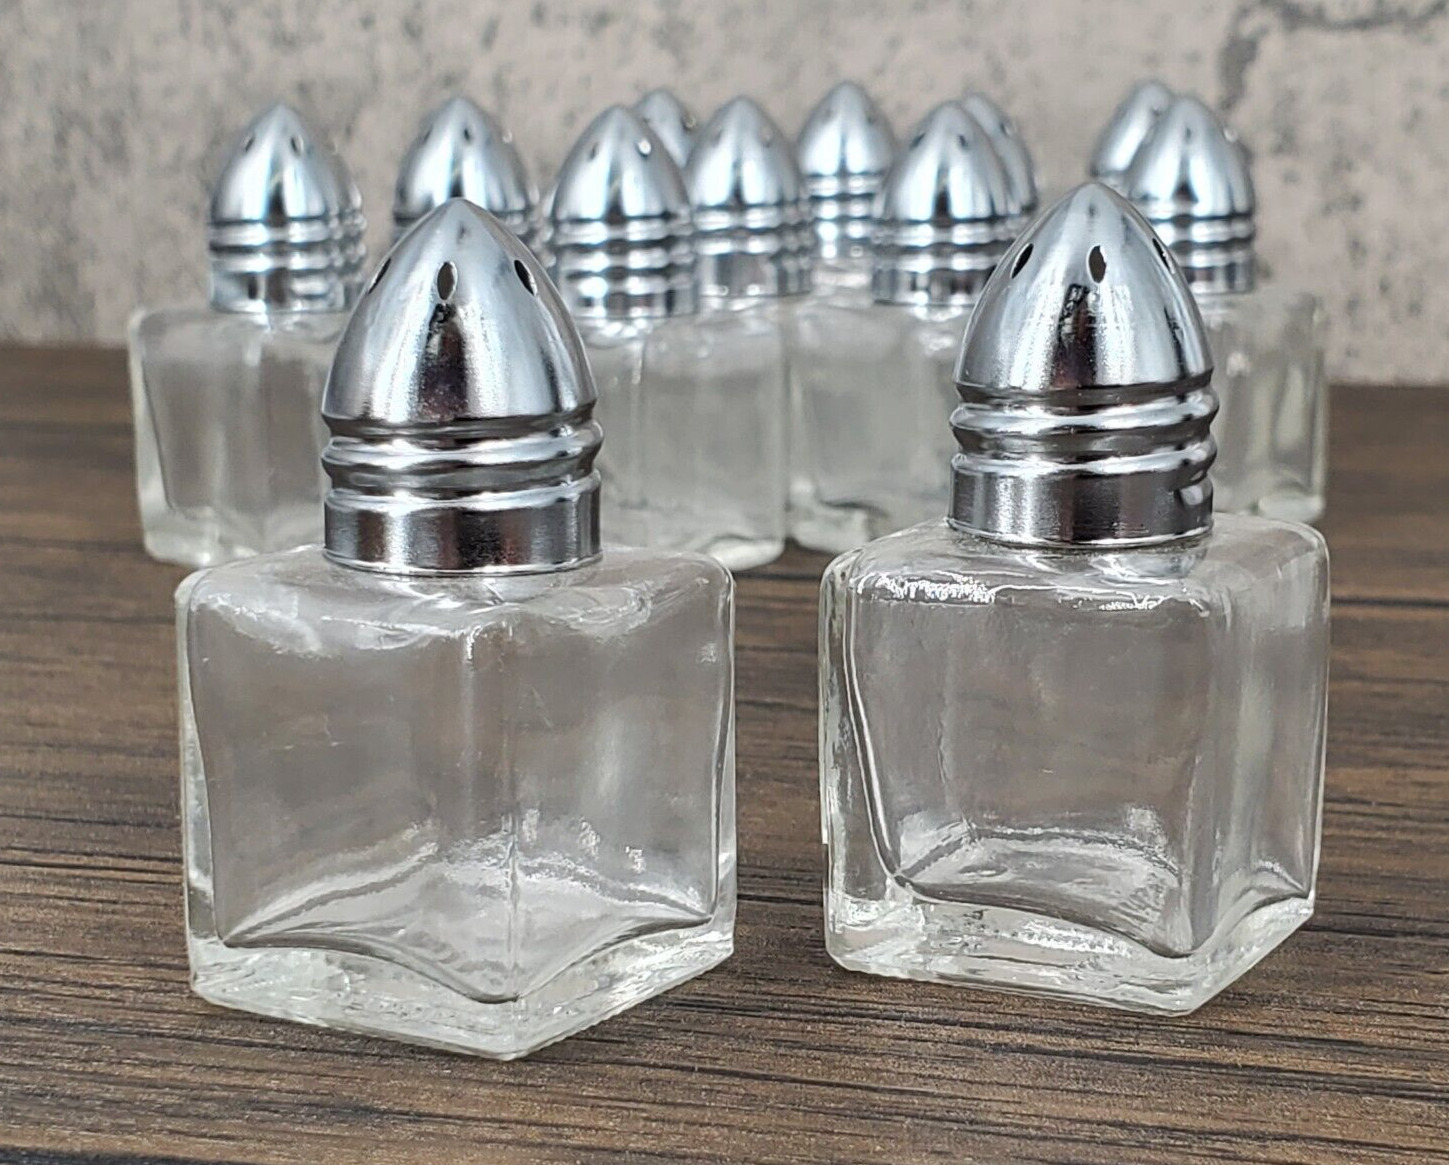 Lot of 6 Pairs Tablecraft Glass & Stainless Steel Salt & Pepper Shakers Parties